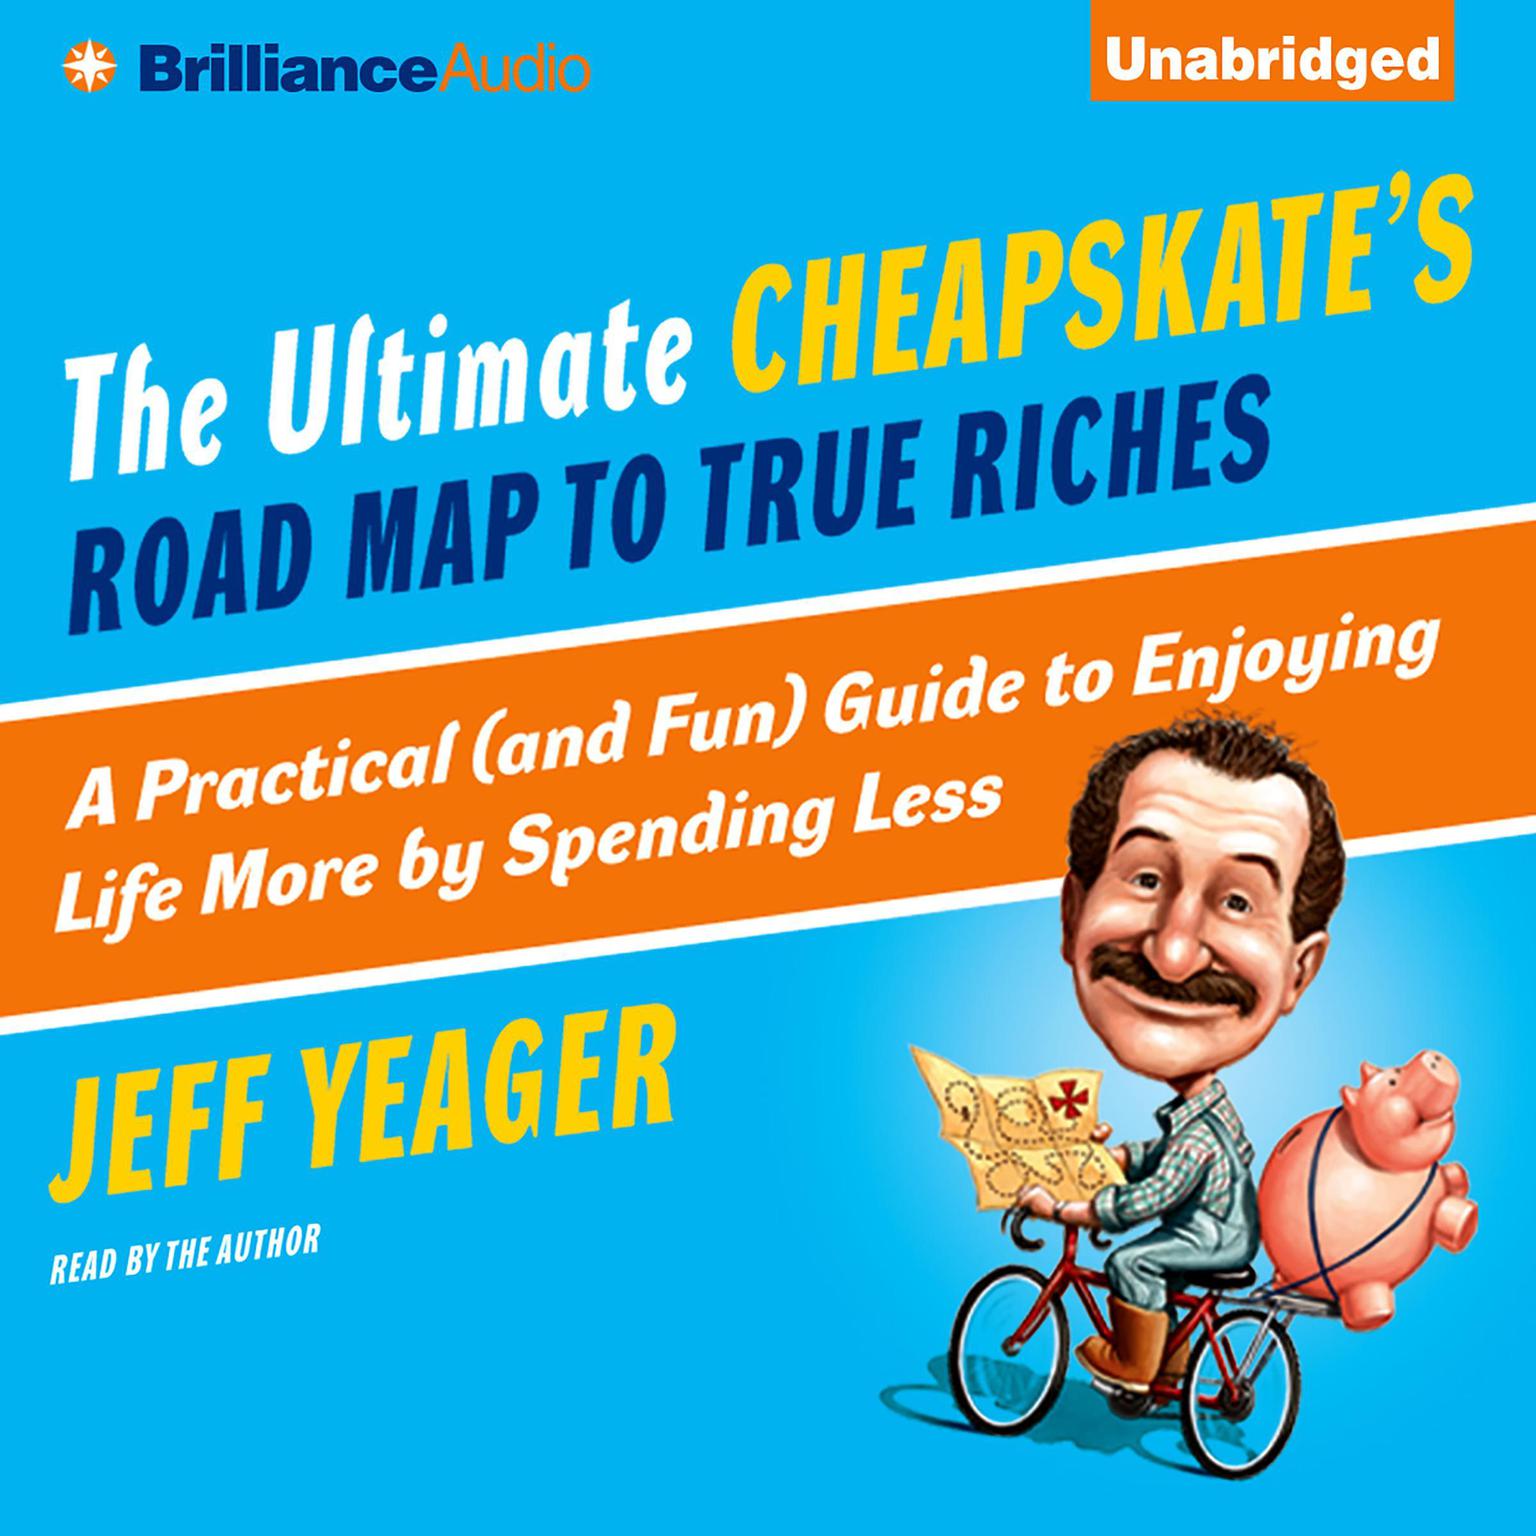 The Ultimate Cheapskate’s Road Map to True Riches: A Practical (and Fun) Guide to Enjoying Life More by Spending Less Audiobook, by Jeff Yeager